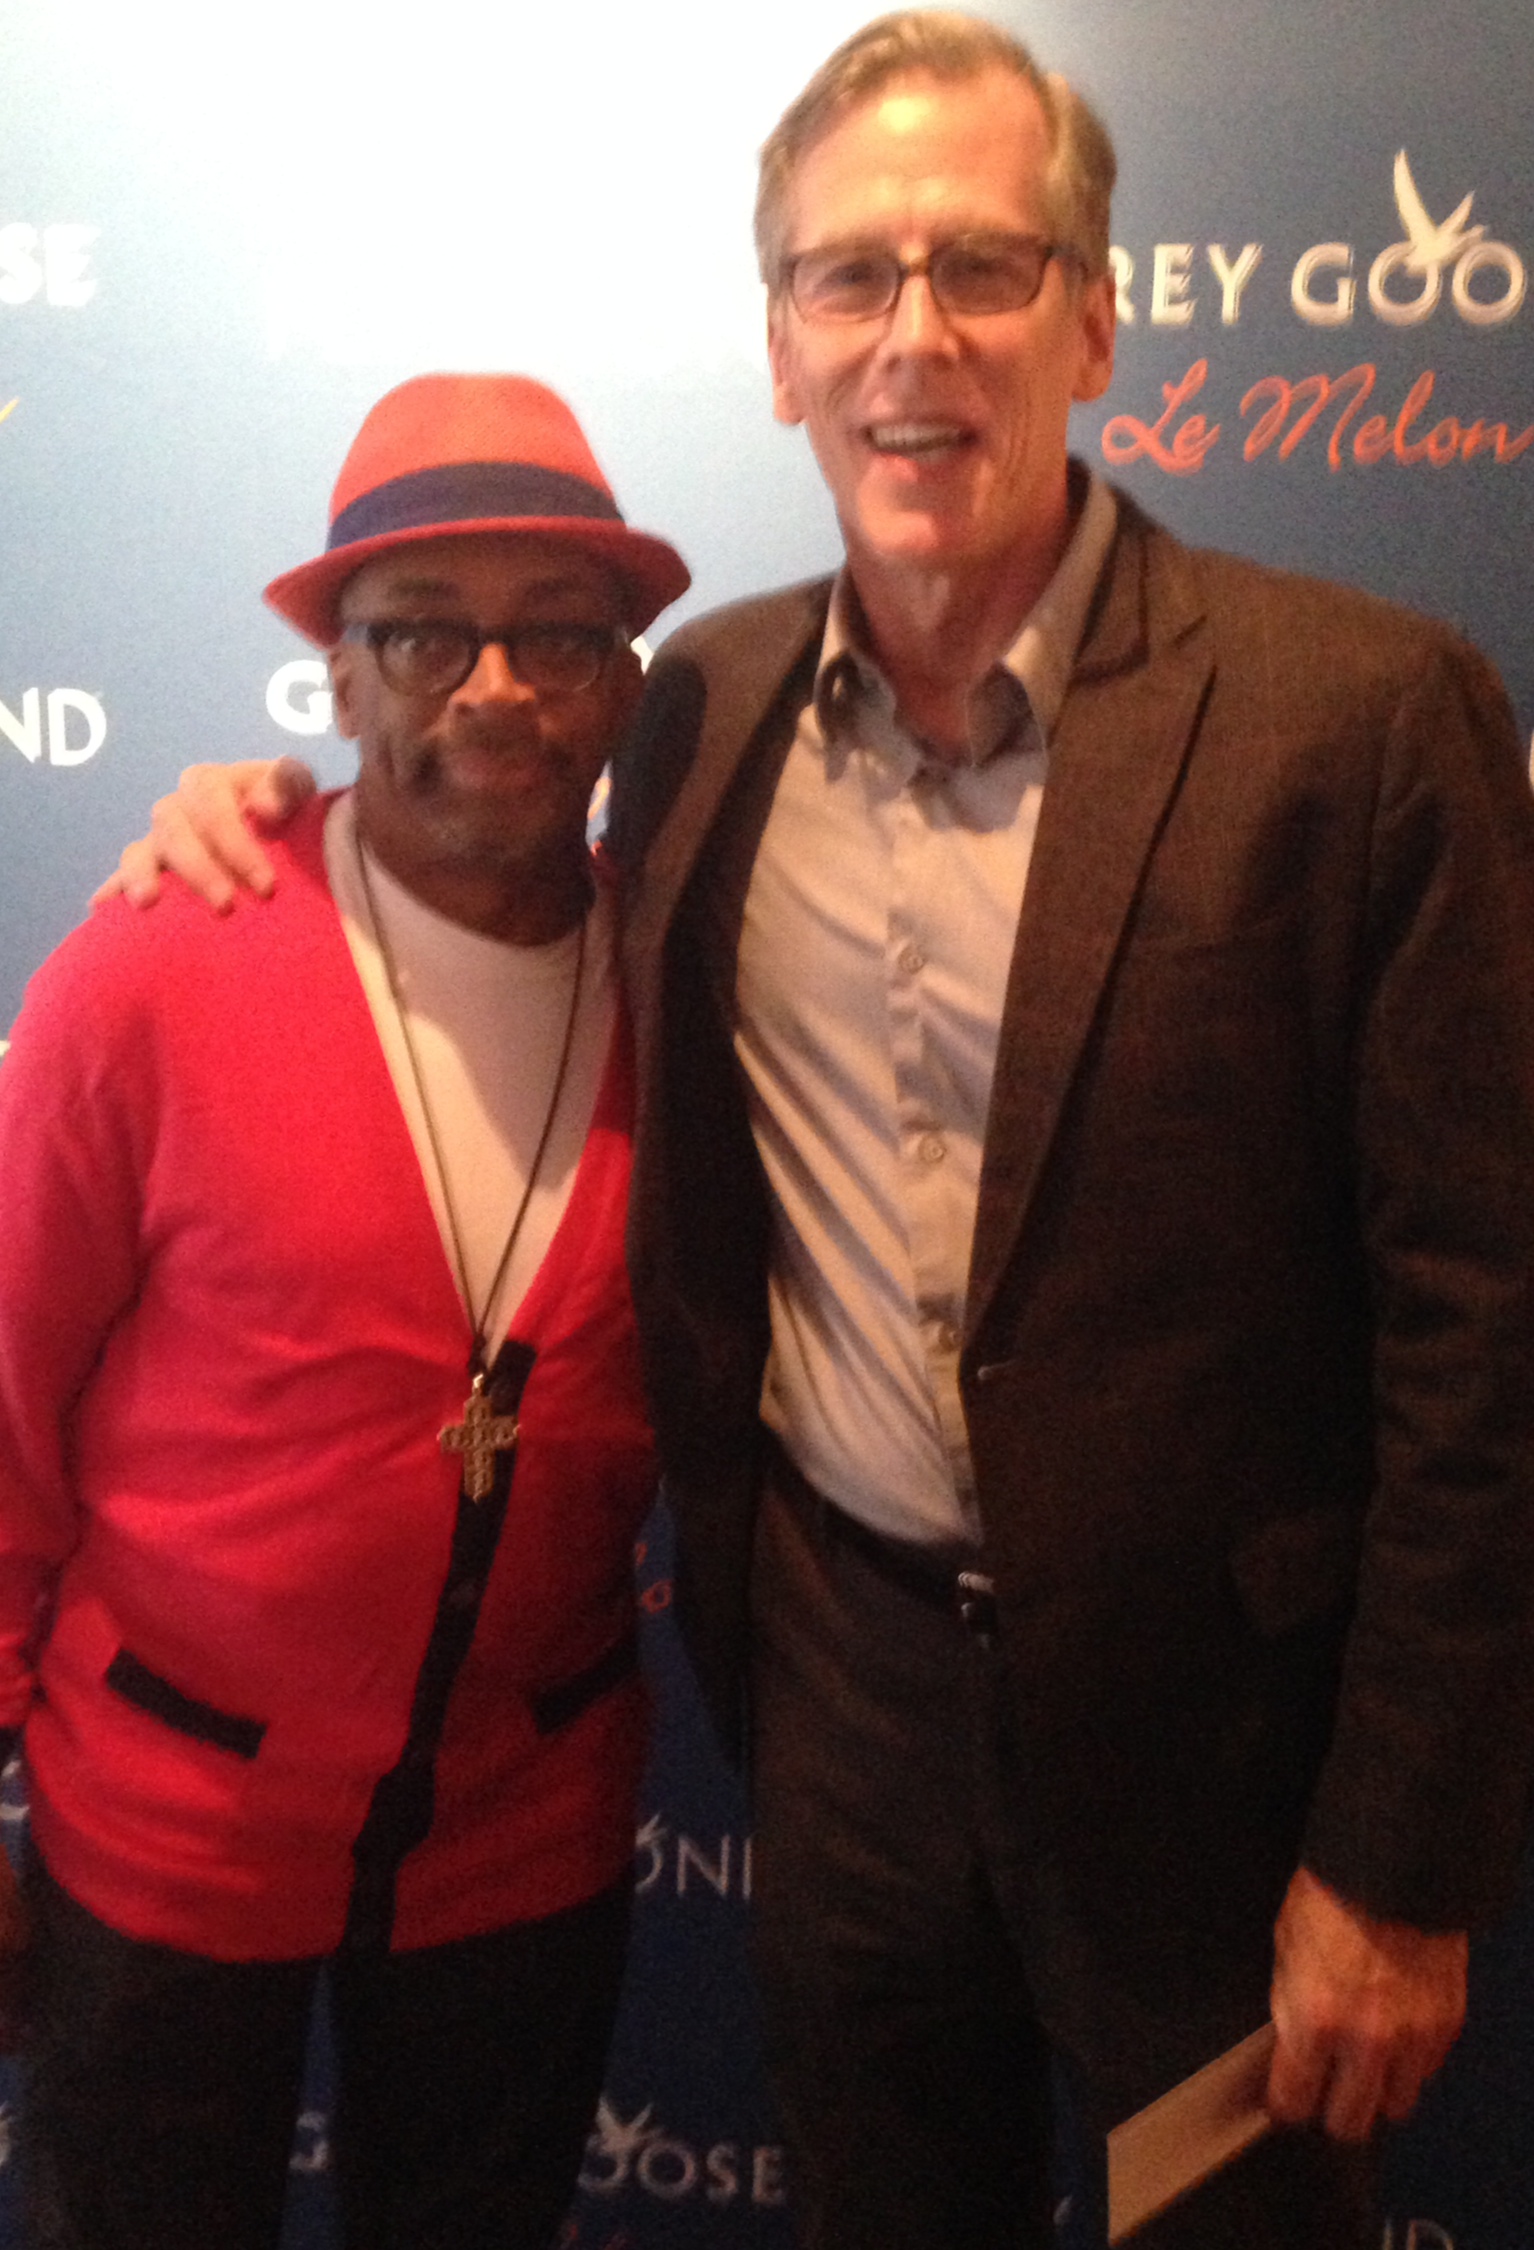 With Spike Lee at the New York screening of DA SWEET BLOOD OF JESUS.